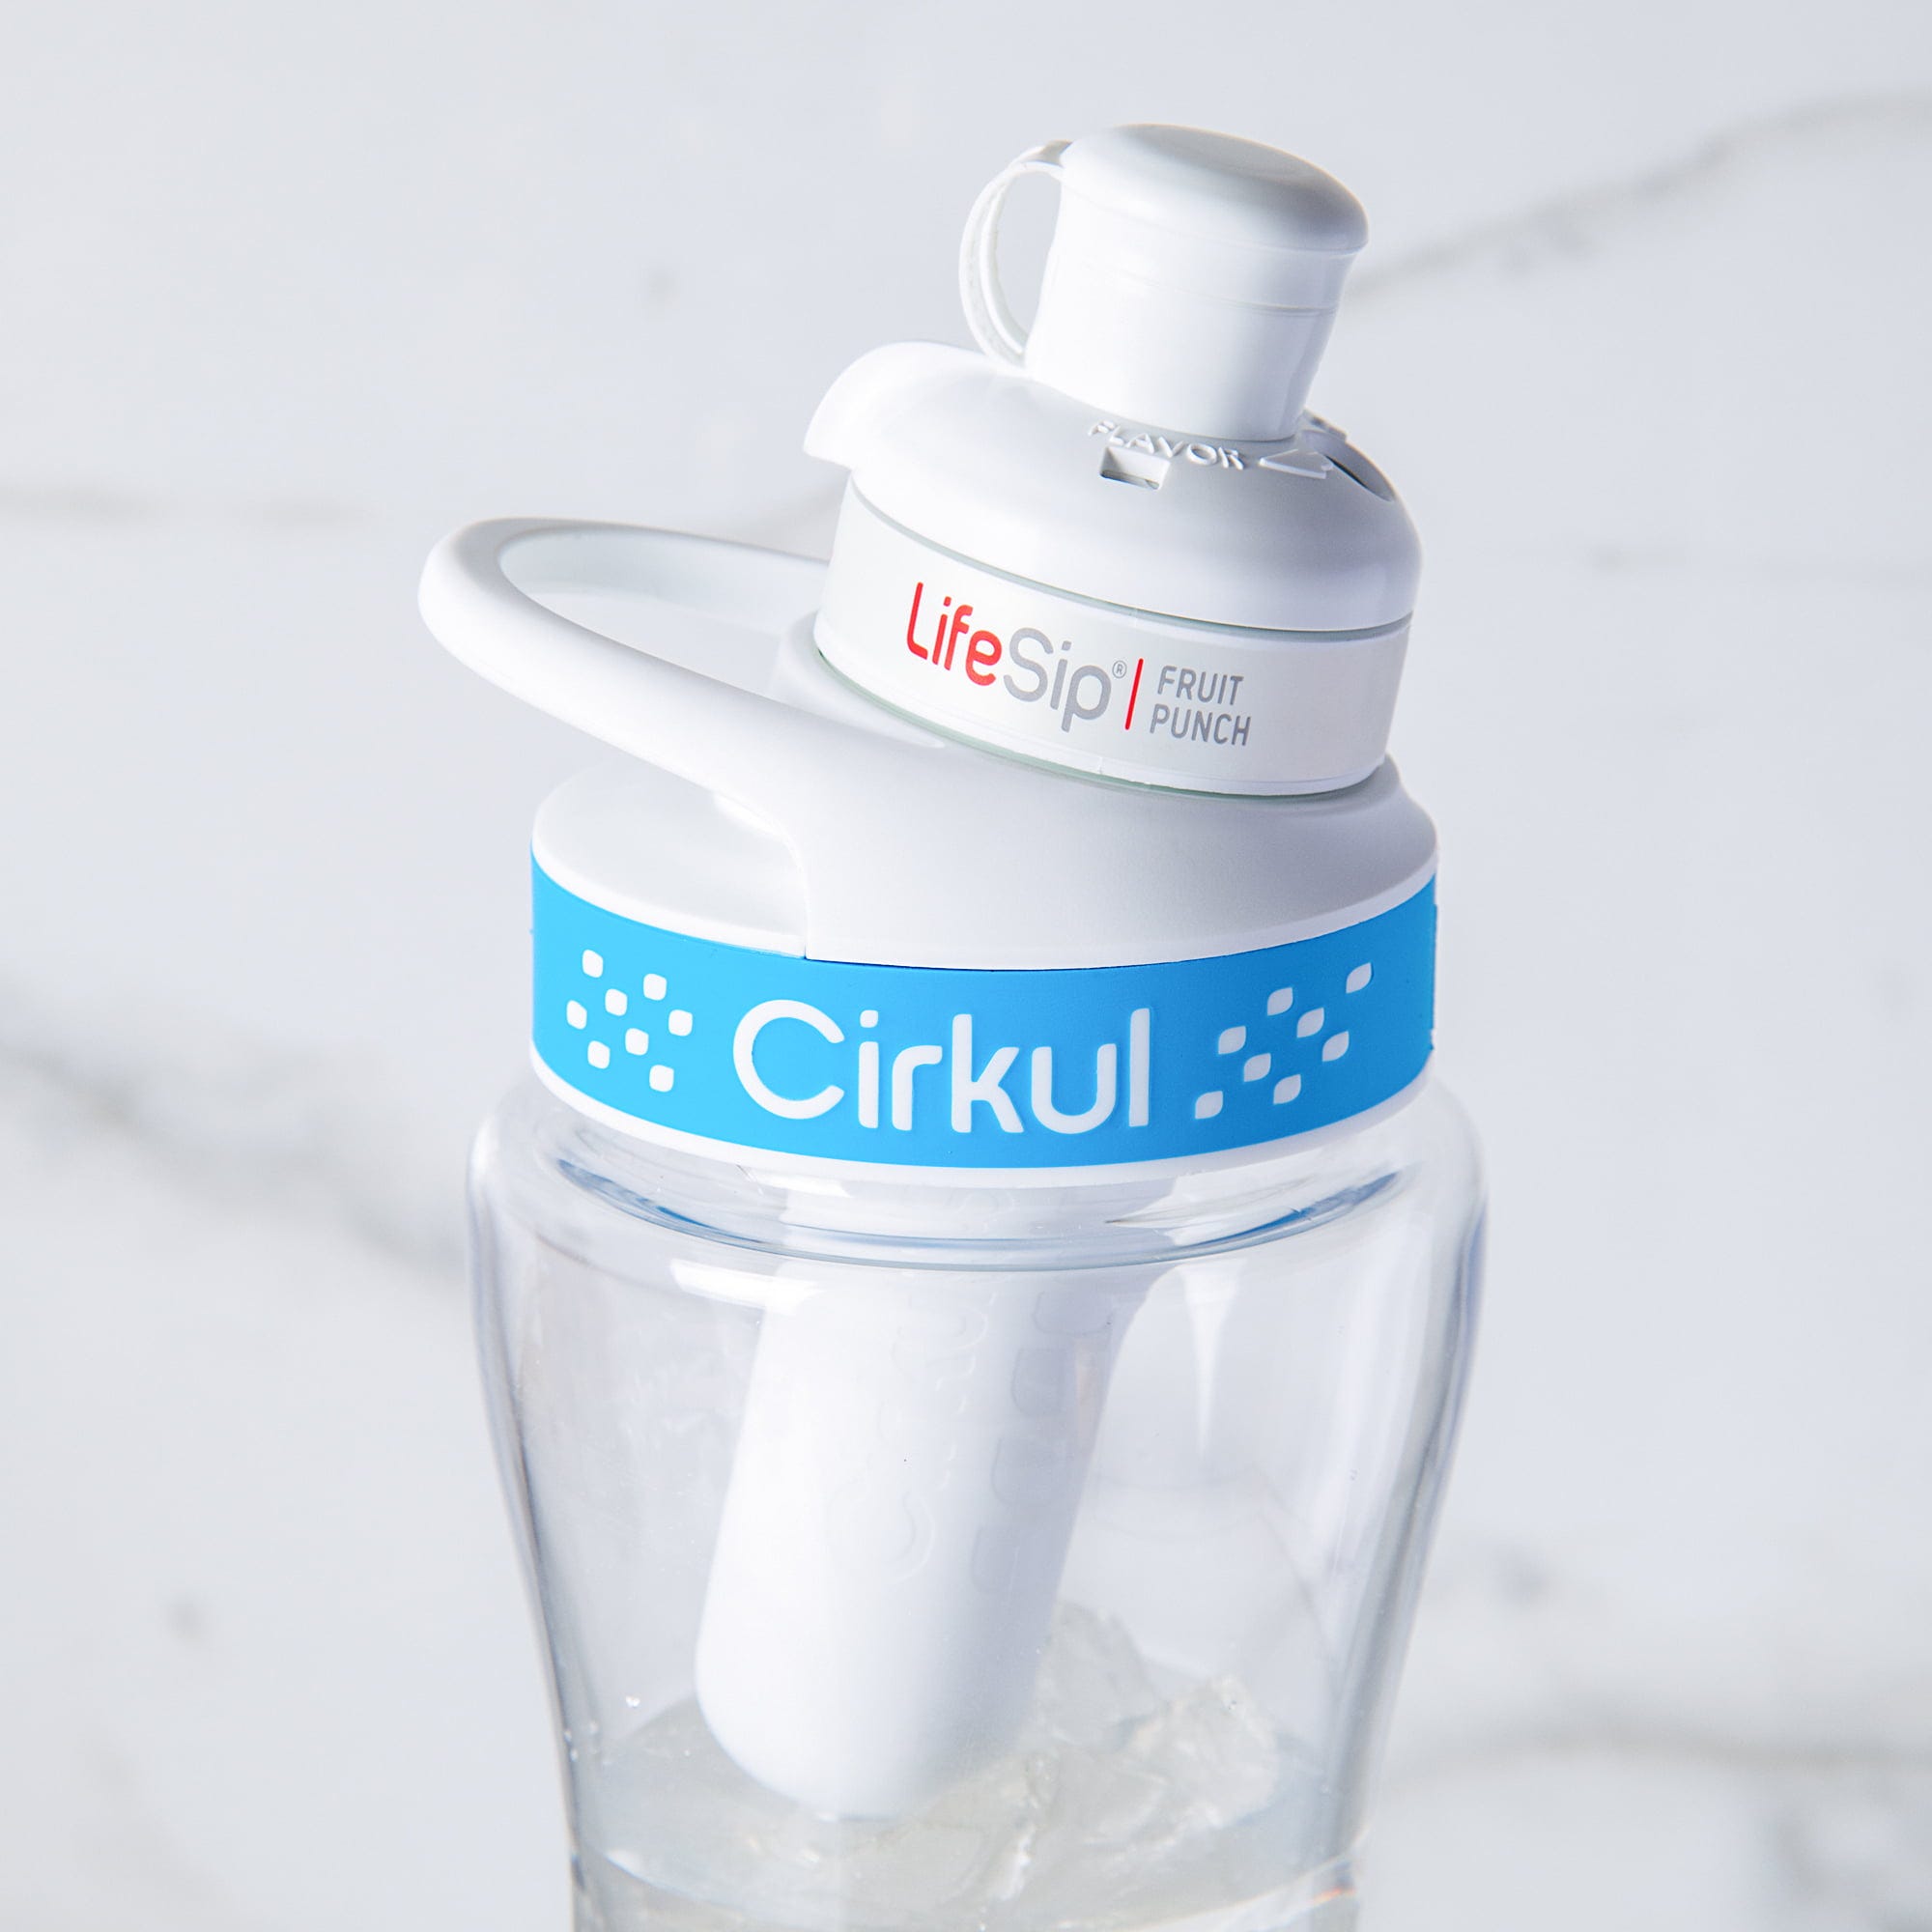 Cirkul Water Bottle Review: Buy Now for 35% Off